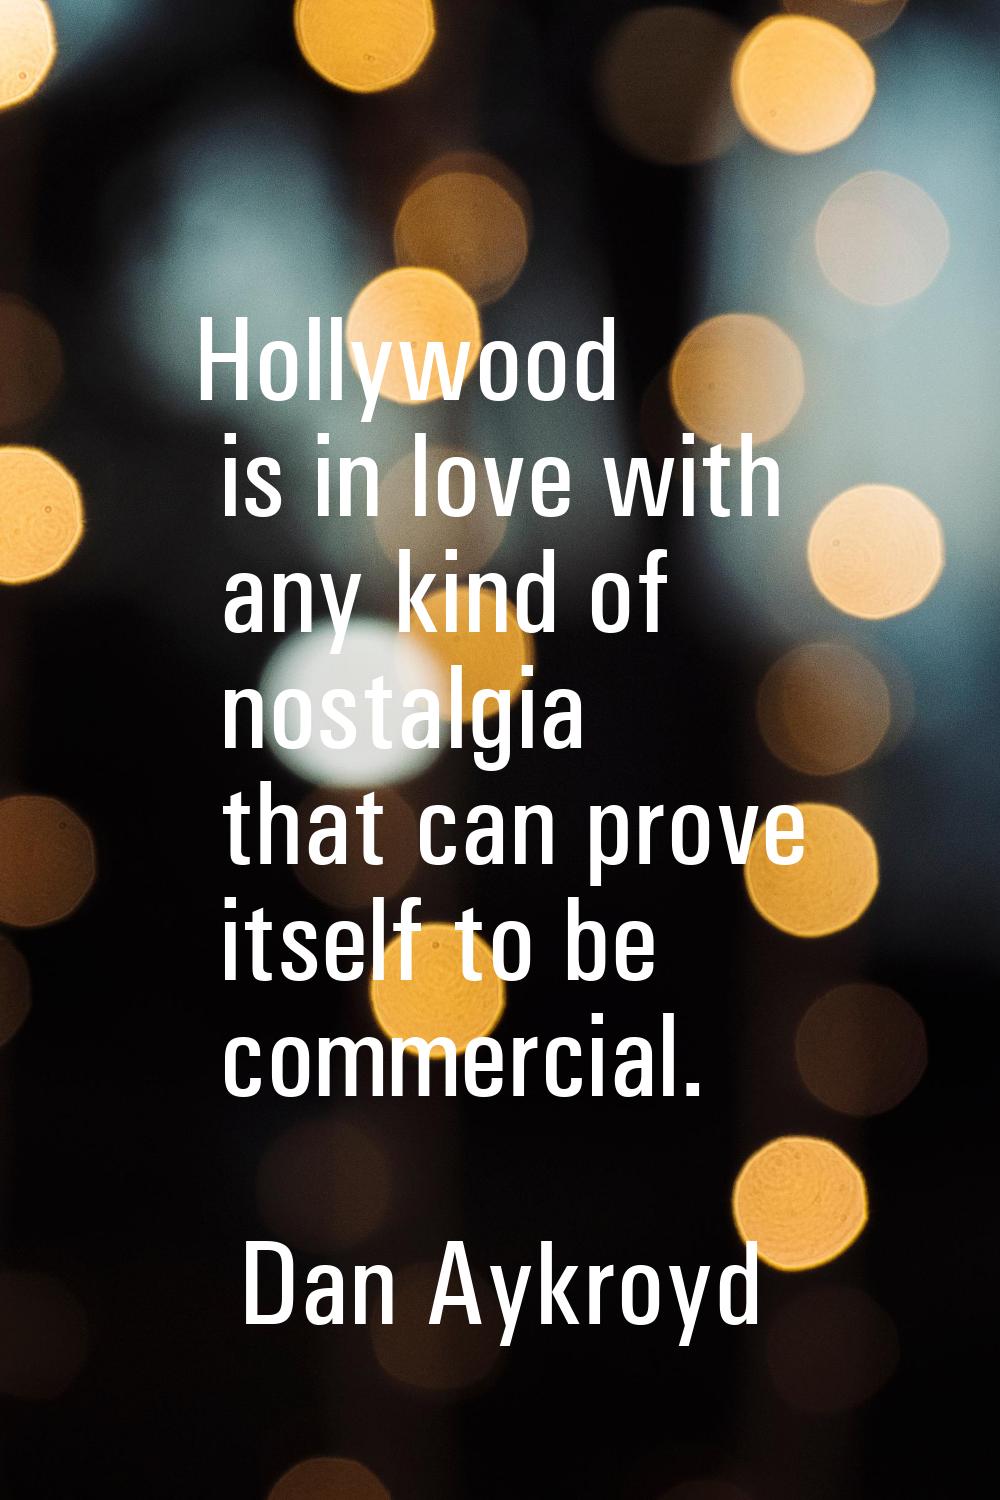 Hollywood is in love with any kind of nostalgia that can prove itself to be commercial.